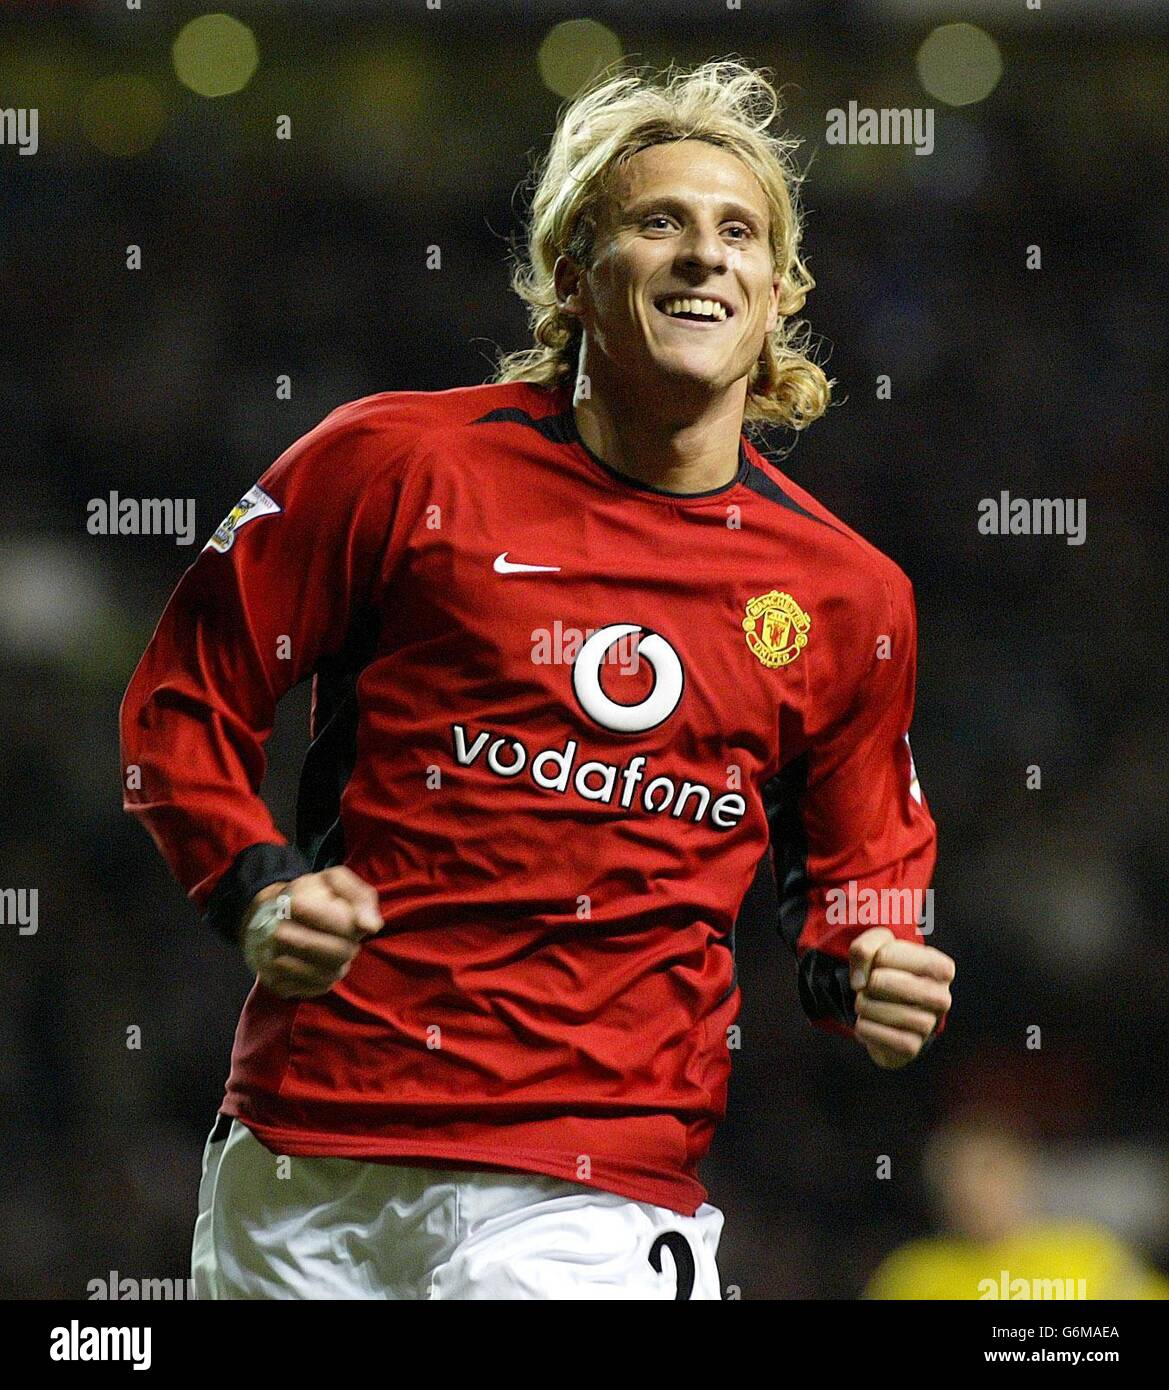 Manchester United's Diego Forlan celebrates scoring the fourth goal against Aston Villa during the Barclaycard Premiership match at Old Trafford, Manchester. Manchester United won 4-0. 21/08/04: Manchester United's Diego Forlan was introduced as a Villarreal player after passing his medical and agreeing terms on a five-year contract with the Primera Liga club who have paid an undisclosed fee. Stock Photo